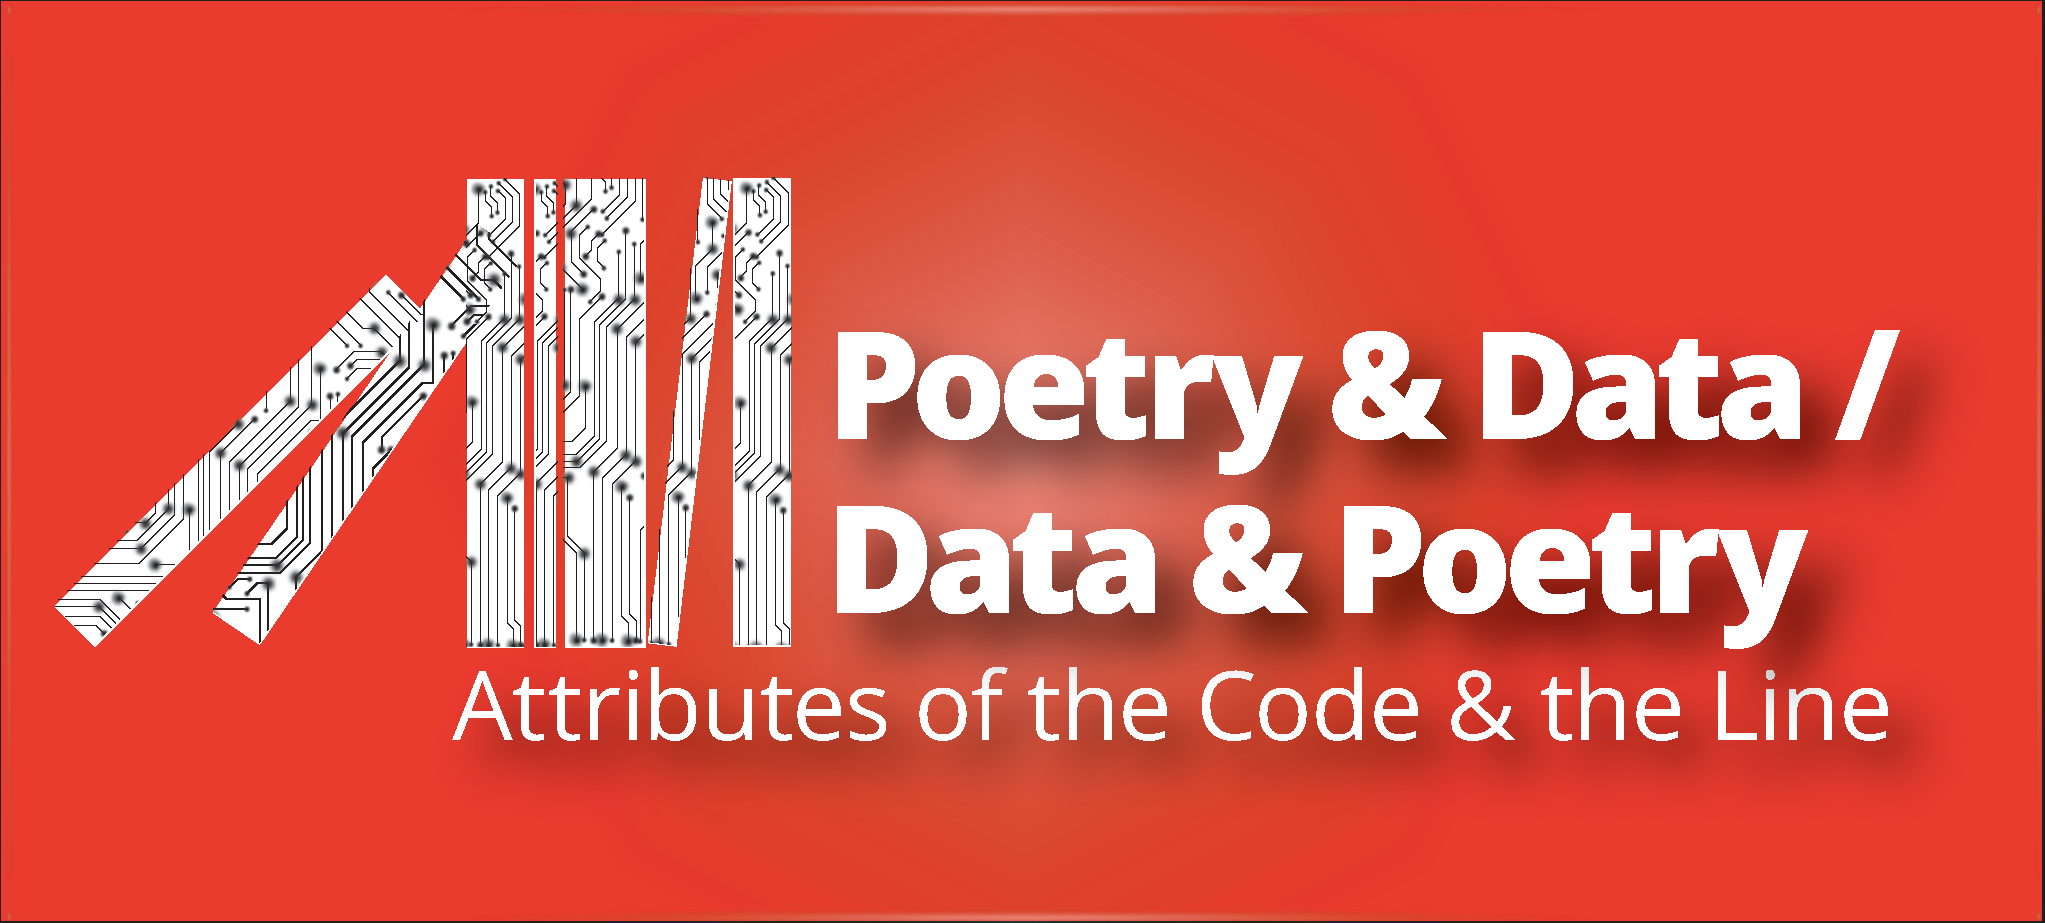 poetry and data workshop graphic